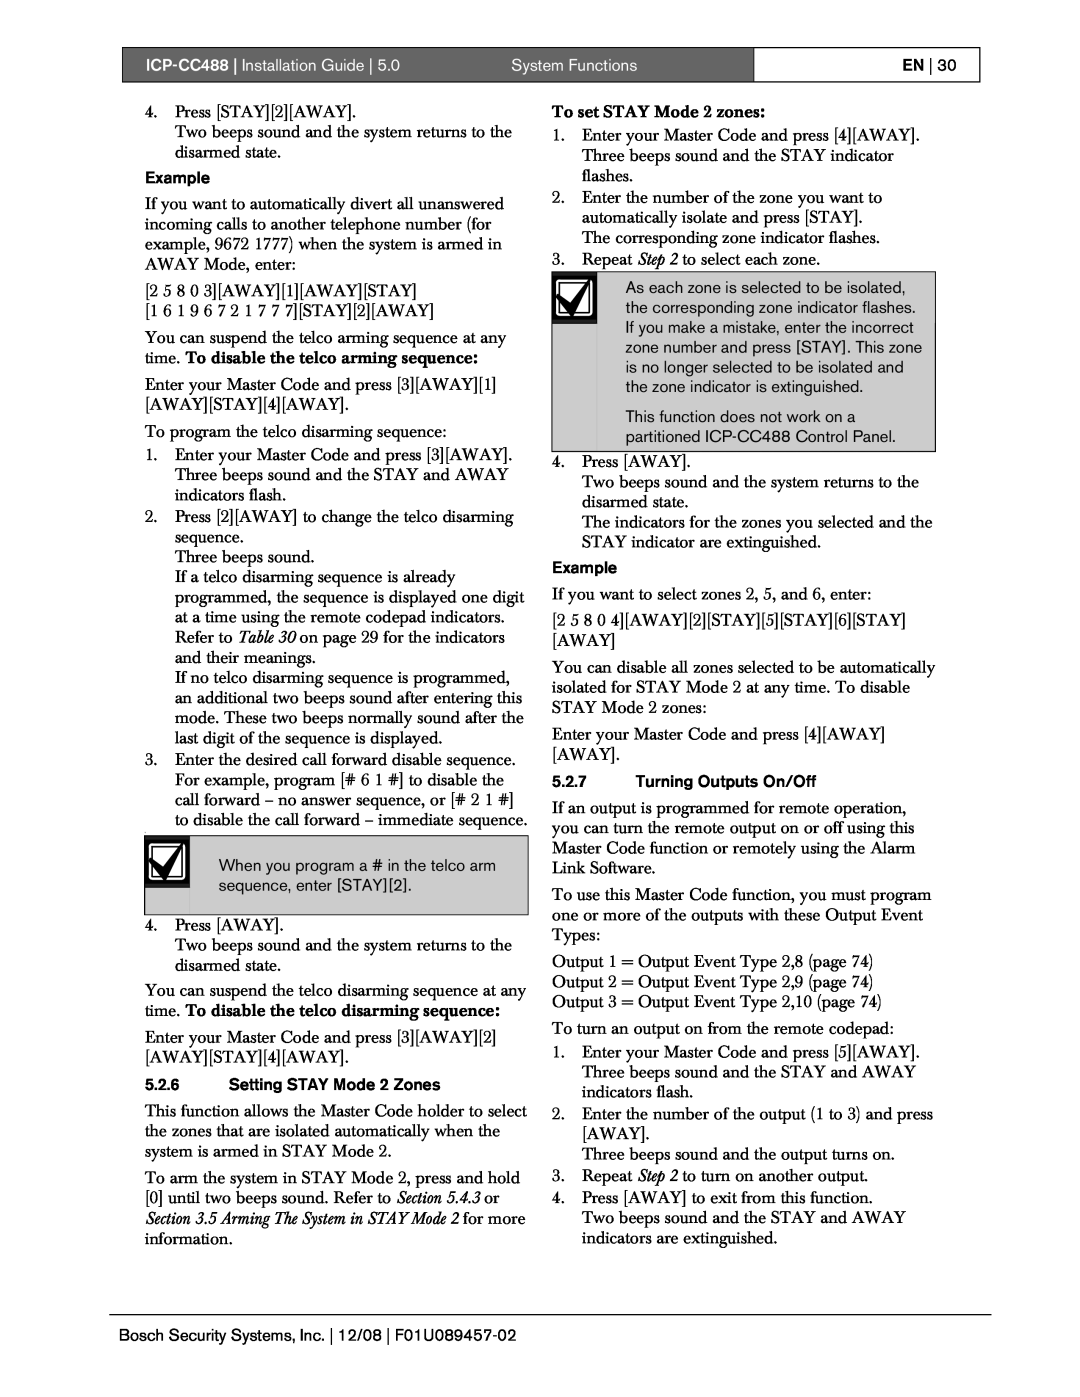 Bosch Appliances manual ICP-CC488 Installation Guide, System Functions, En, Example, 5.2.6Setting STAY Mode 2 Zones 